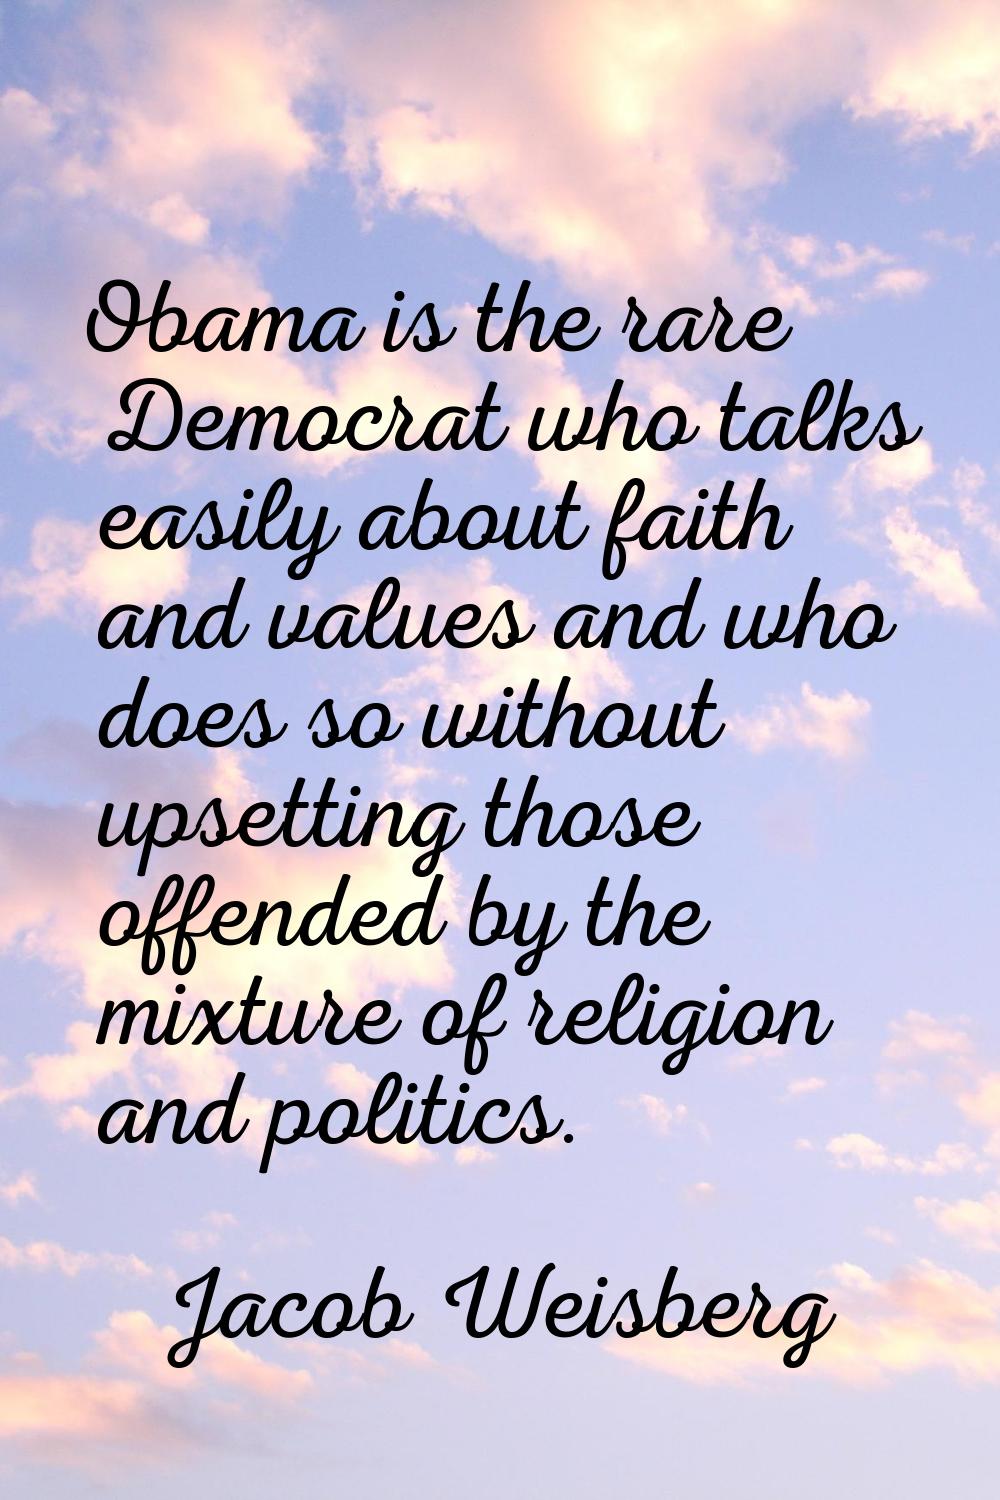 Obama is the rare Democrat who talks easily about faith and values and who does so without upsettin